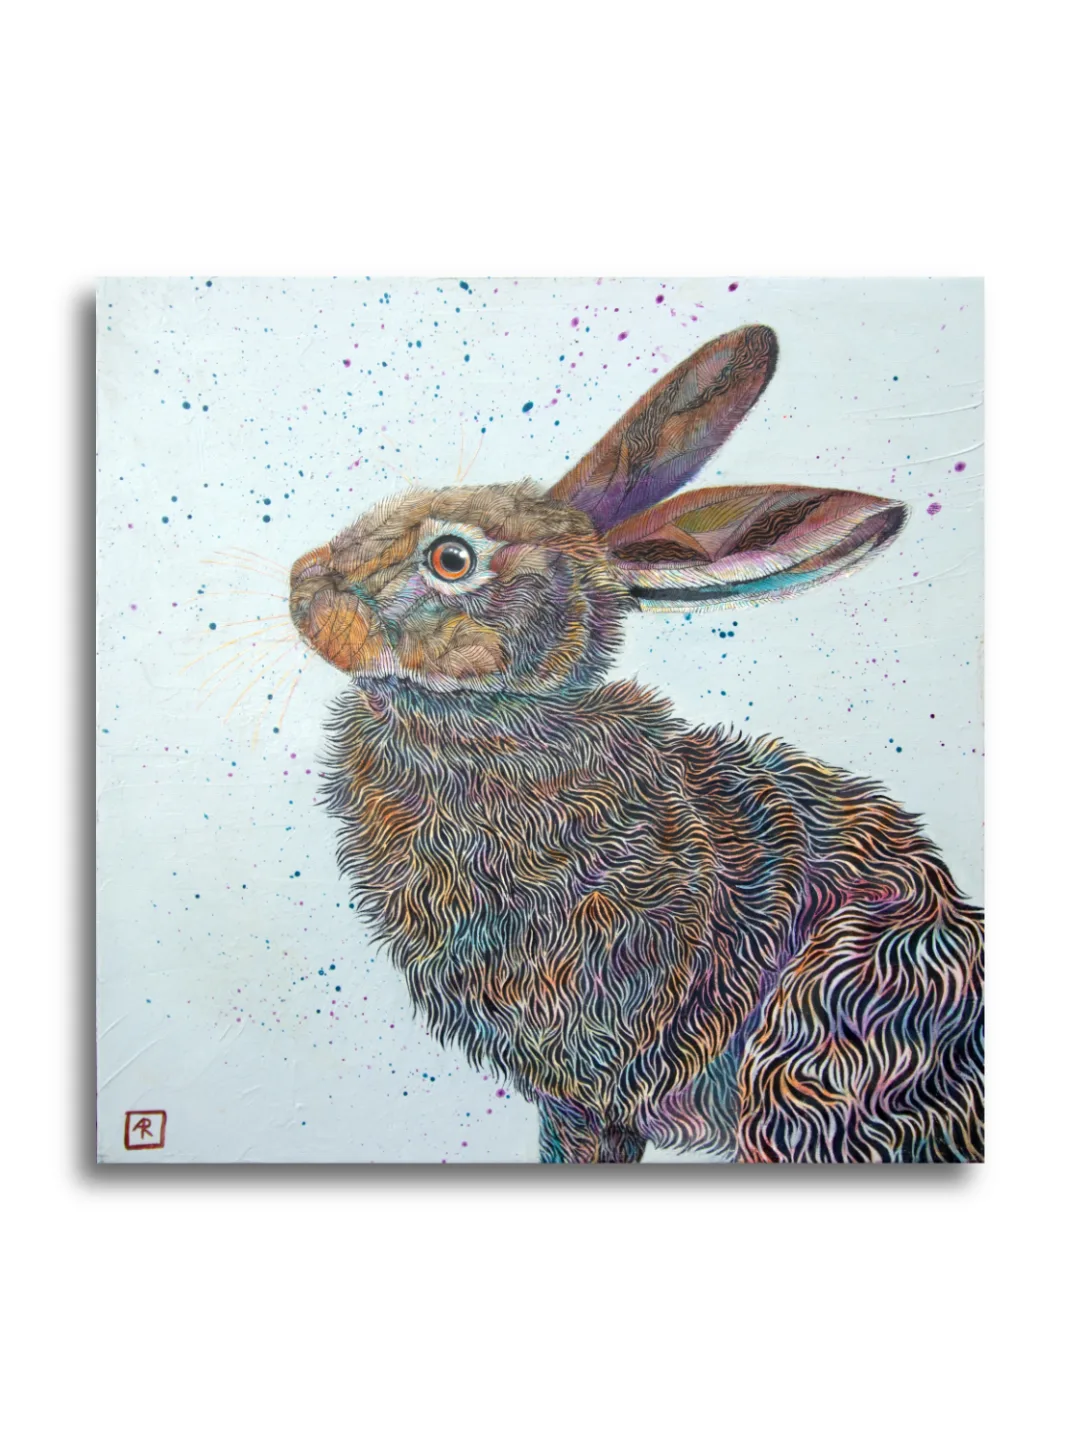 Rainbow Rabbit by Ann Richmond - A stunning, Original artwork featuring a stylised Rabbit. Painted in the artist's unique style... Framing available.